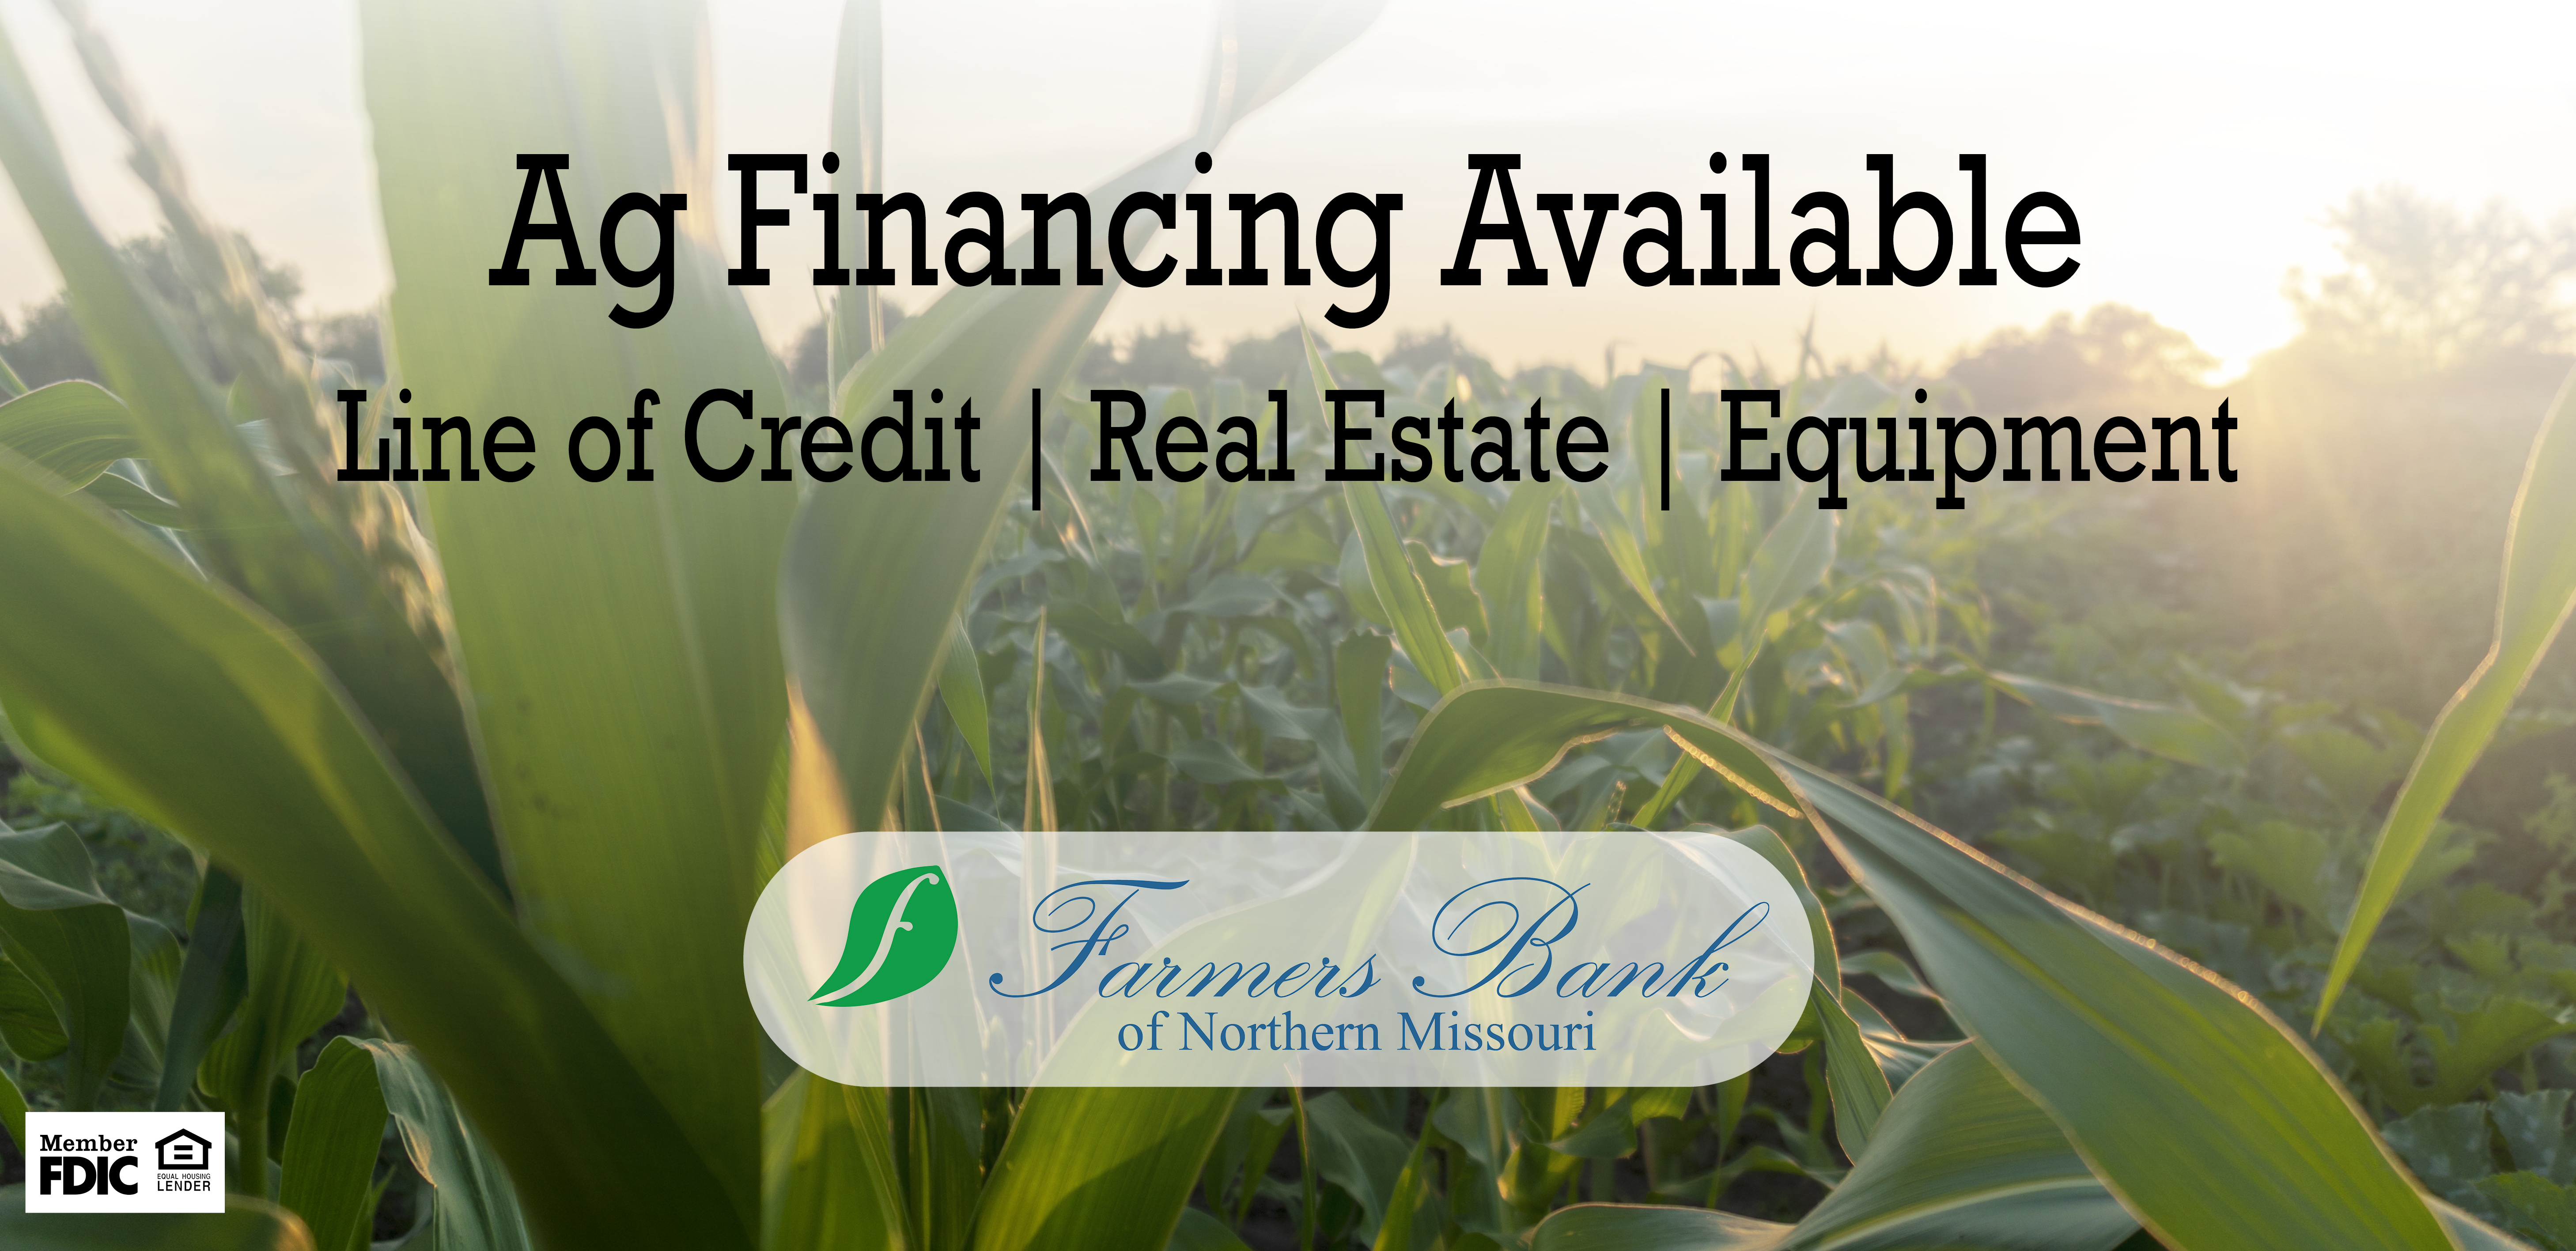 Ag Financing Available. Line of Credit, Real Estate, Equipment. Farmers Bank of Northern Missouri, Member FDIC, Equal Housing Lender